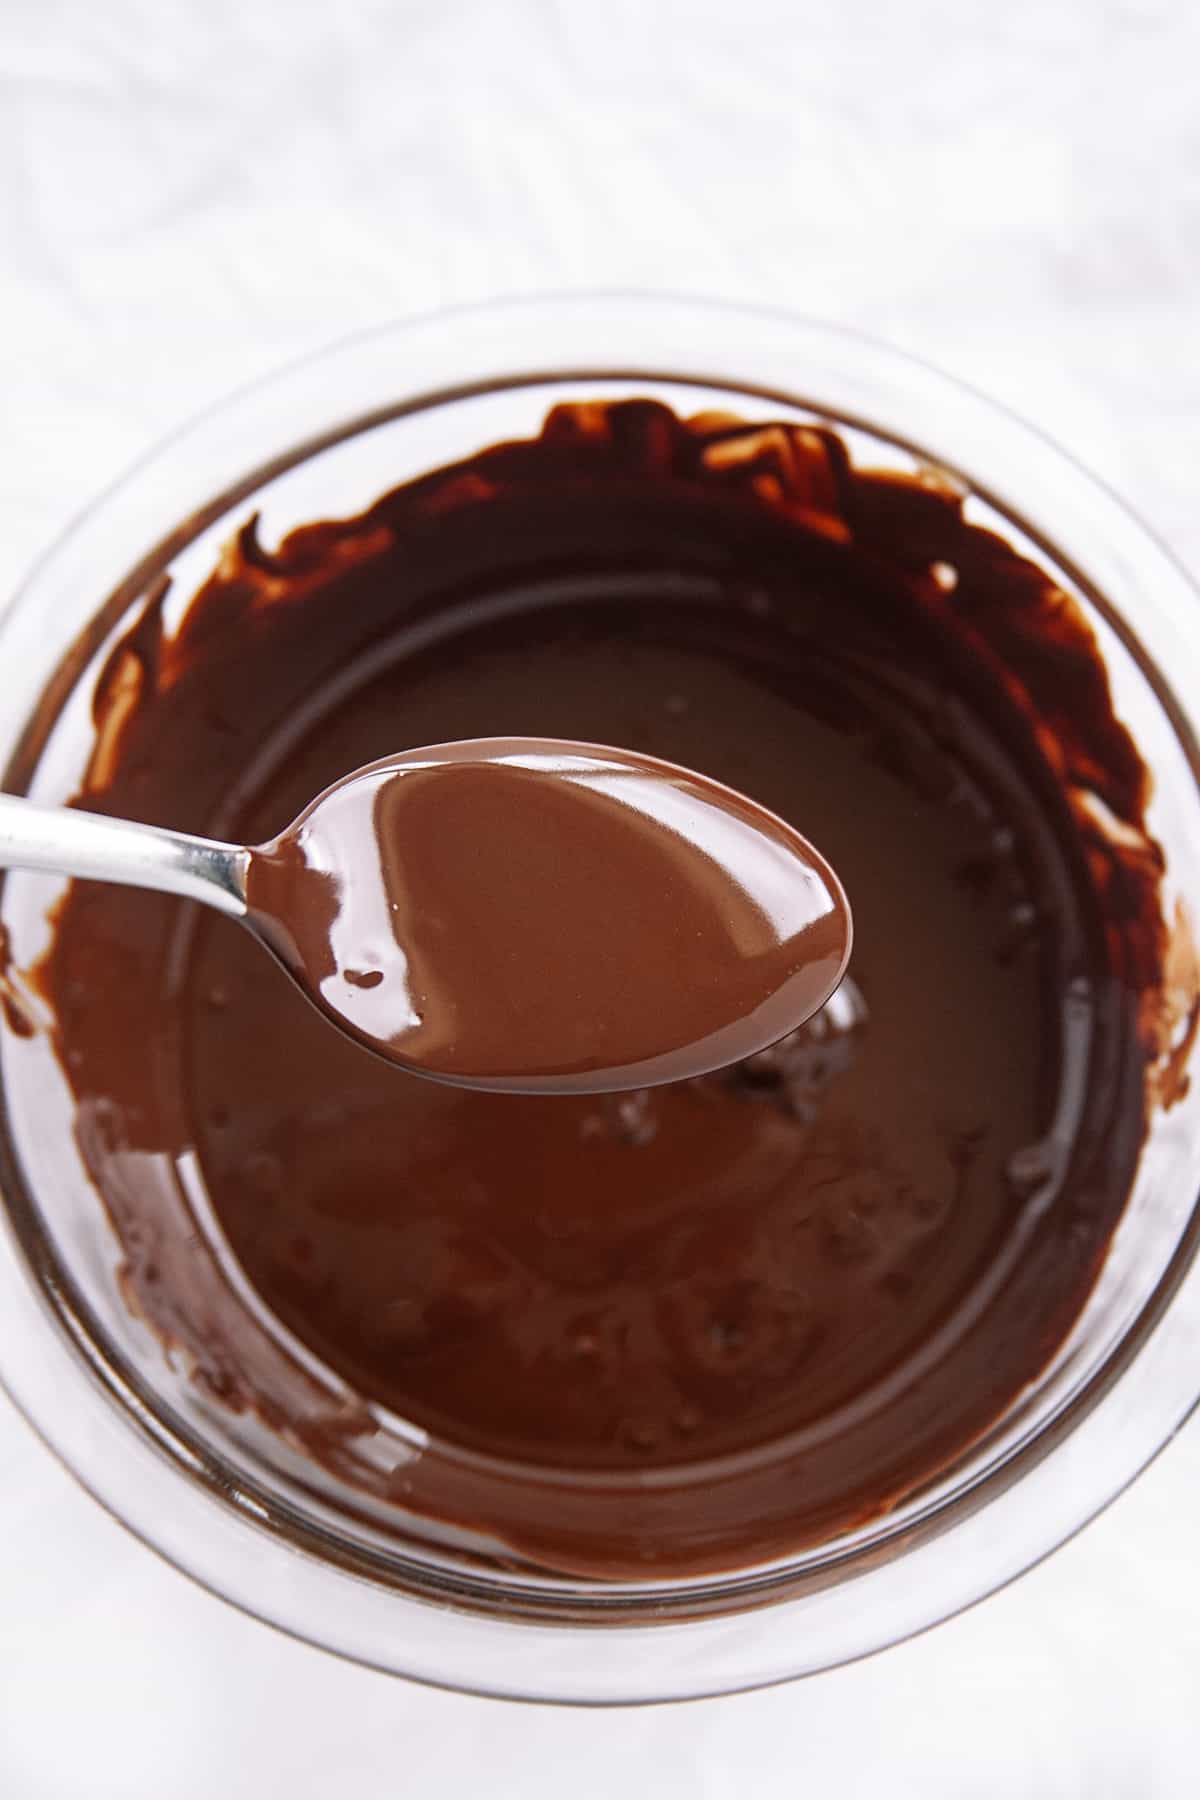 Showing a spoonful of chocolate from a bowl of of melted chocolate. 